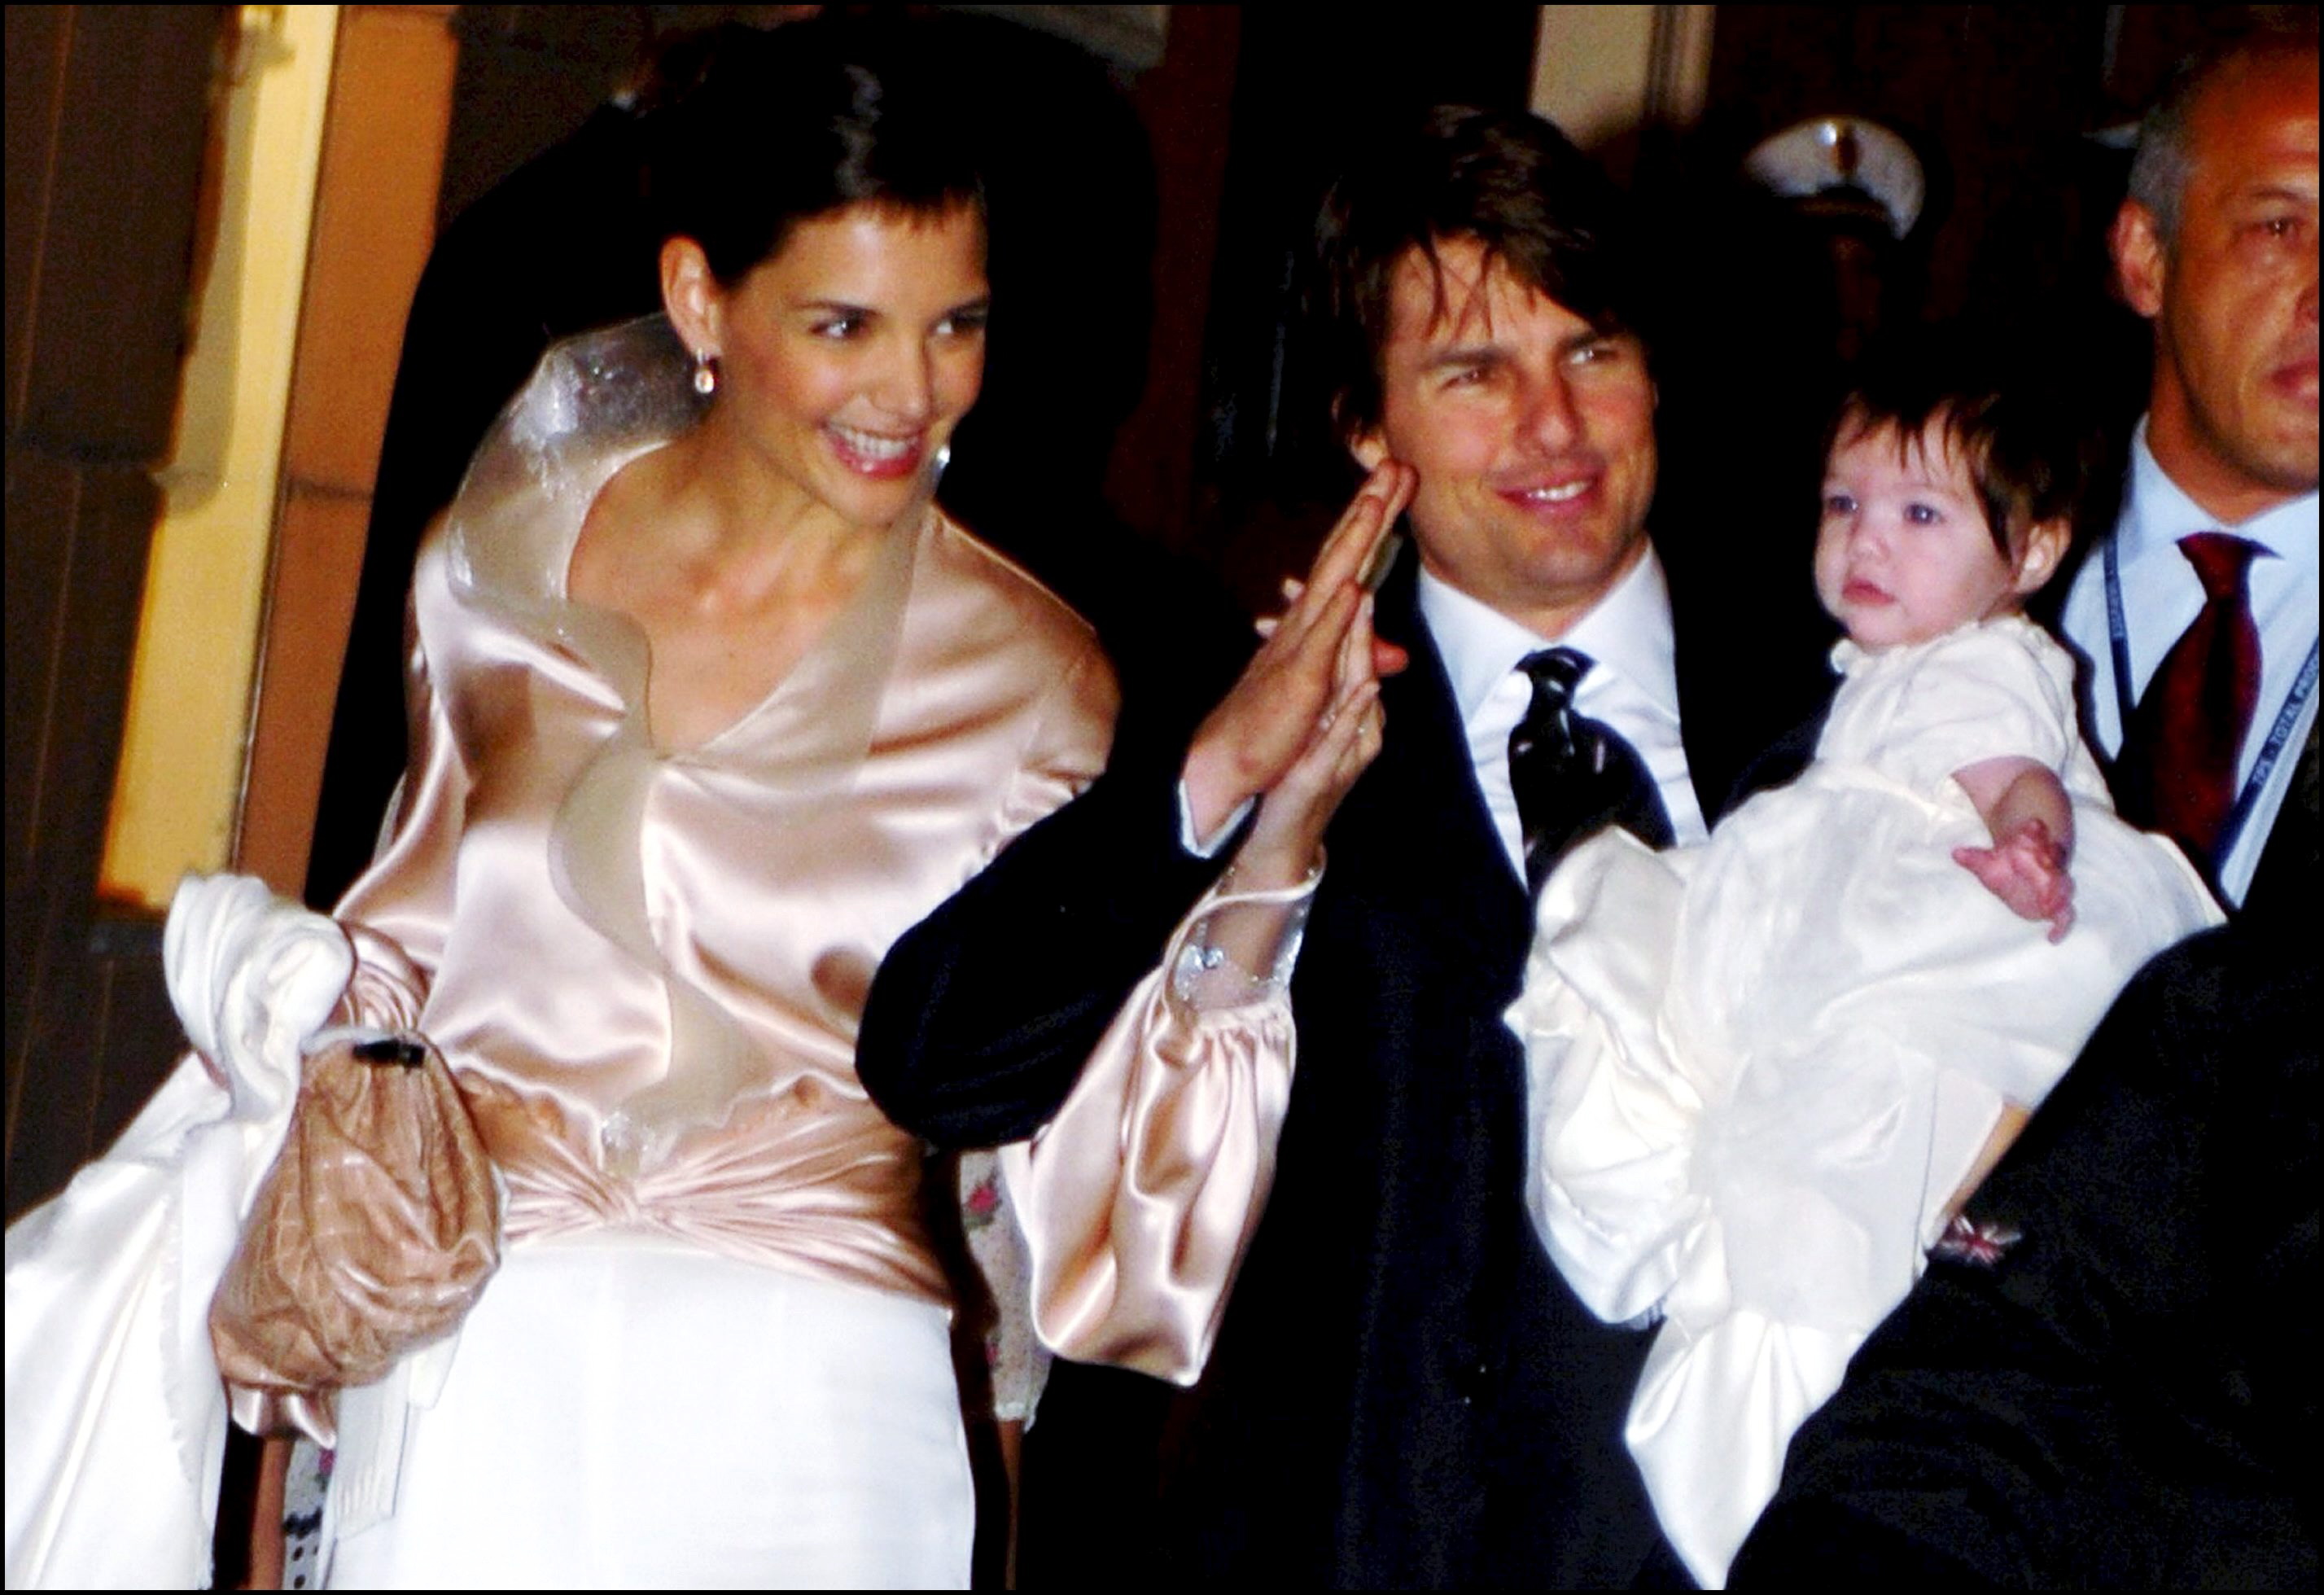 Tom Cruise and Katie Holmes with their daughter Suri at the restaurant "Nino" near Plaza di Spagna, in Rome, Italy on November 16, 2006 | Source: Getty Images